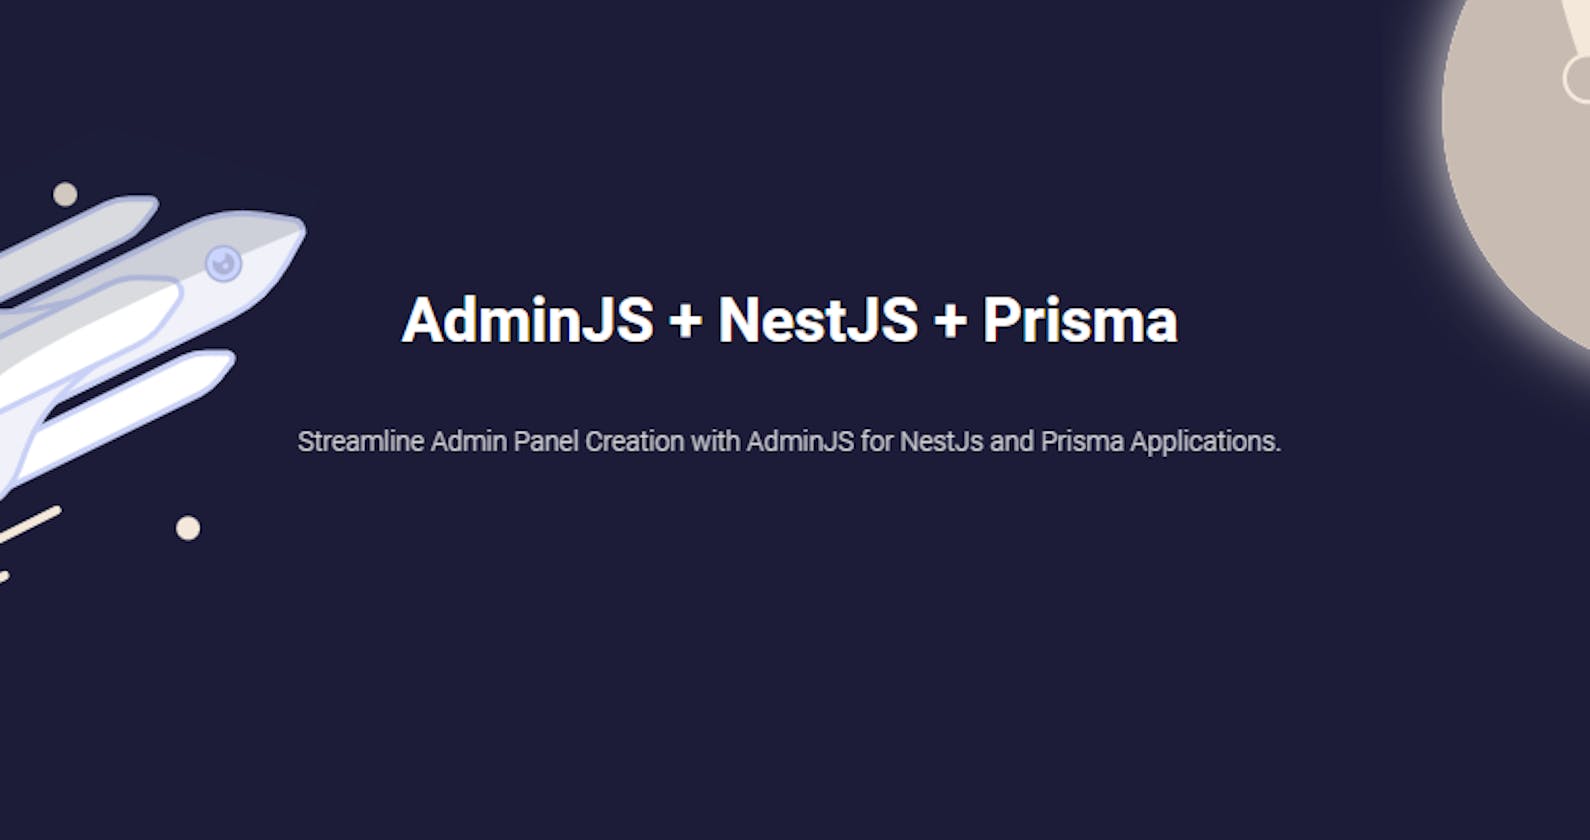 Creating Admin Panels for NestJs and Prisma Made Easy with AdminJS